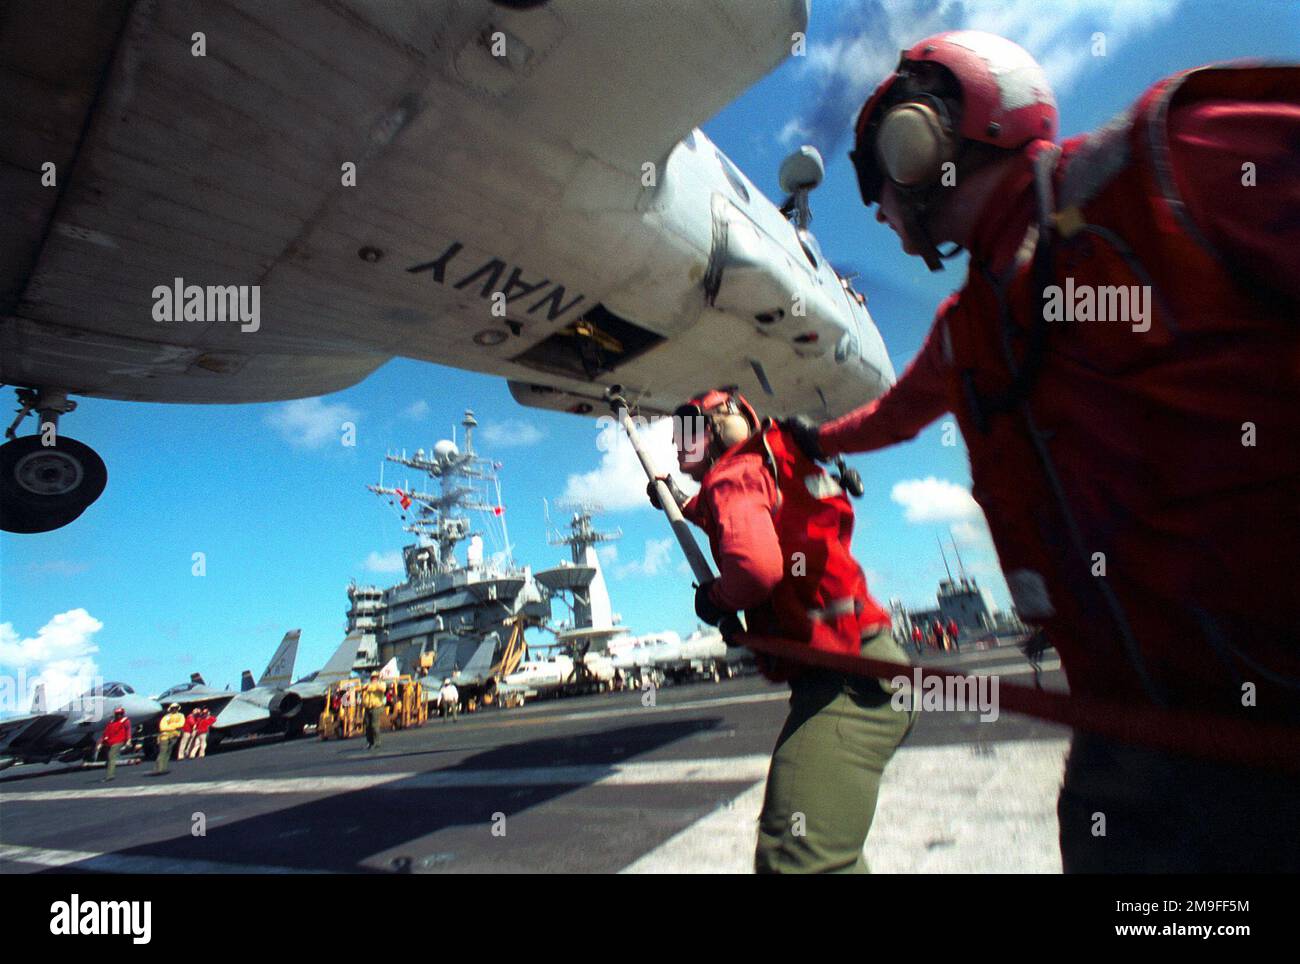 https://c8.alamy.com/comp/2M9FF5M/us-navy-aviation-ordnanceman-michael-tune-has-a-firm-grip-on-the-floatation-coat-of-us-navy-aviation-ordnanceman-airman-erik-white-as-he-attempts-to-rig-a-bundle-of-ammunition-slings-during-replenishment-at-sea-aboard-uss-harry-s-truman-cvn-75-slings-are-used-to-transfer-ammunitions-during-a-vertical-replenishment-at-sea-vertrep-truman-and-its-battle-group-are-participating-in-exercise-unified-spirit-a-nato-led-united-nations-training-exercise-simulating-peace-keeping-operations-off-the-atlantic-coast-subject-operationseries-unified-spirit-base-uss-harry-s-truman-cvn-75-2M9FF5M.jpg